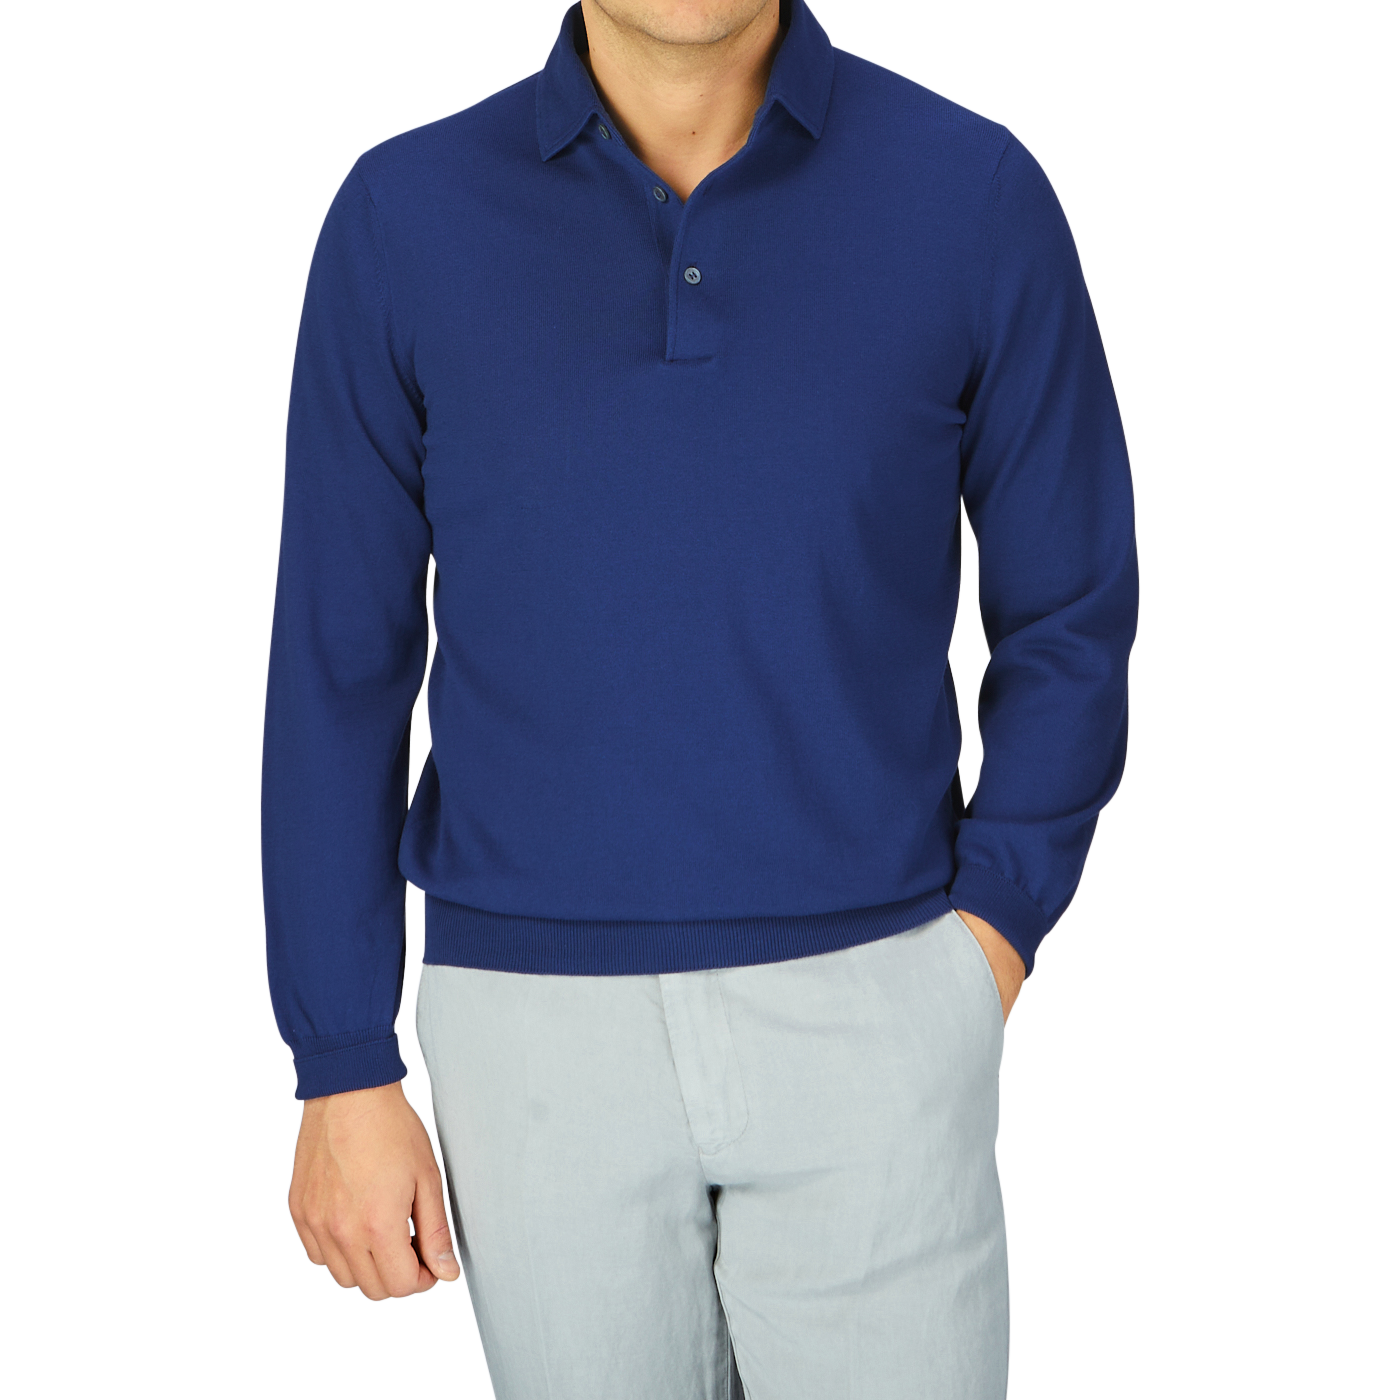 A person wearing an Indigo Blue Organic Cotton LS Gran Sasso polo shirt paired with light gray trousers.